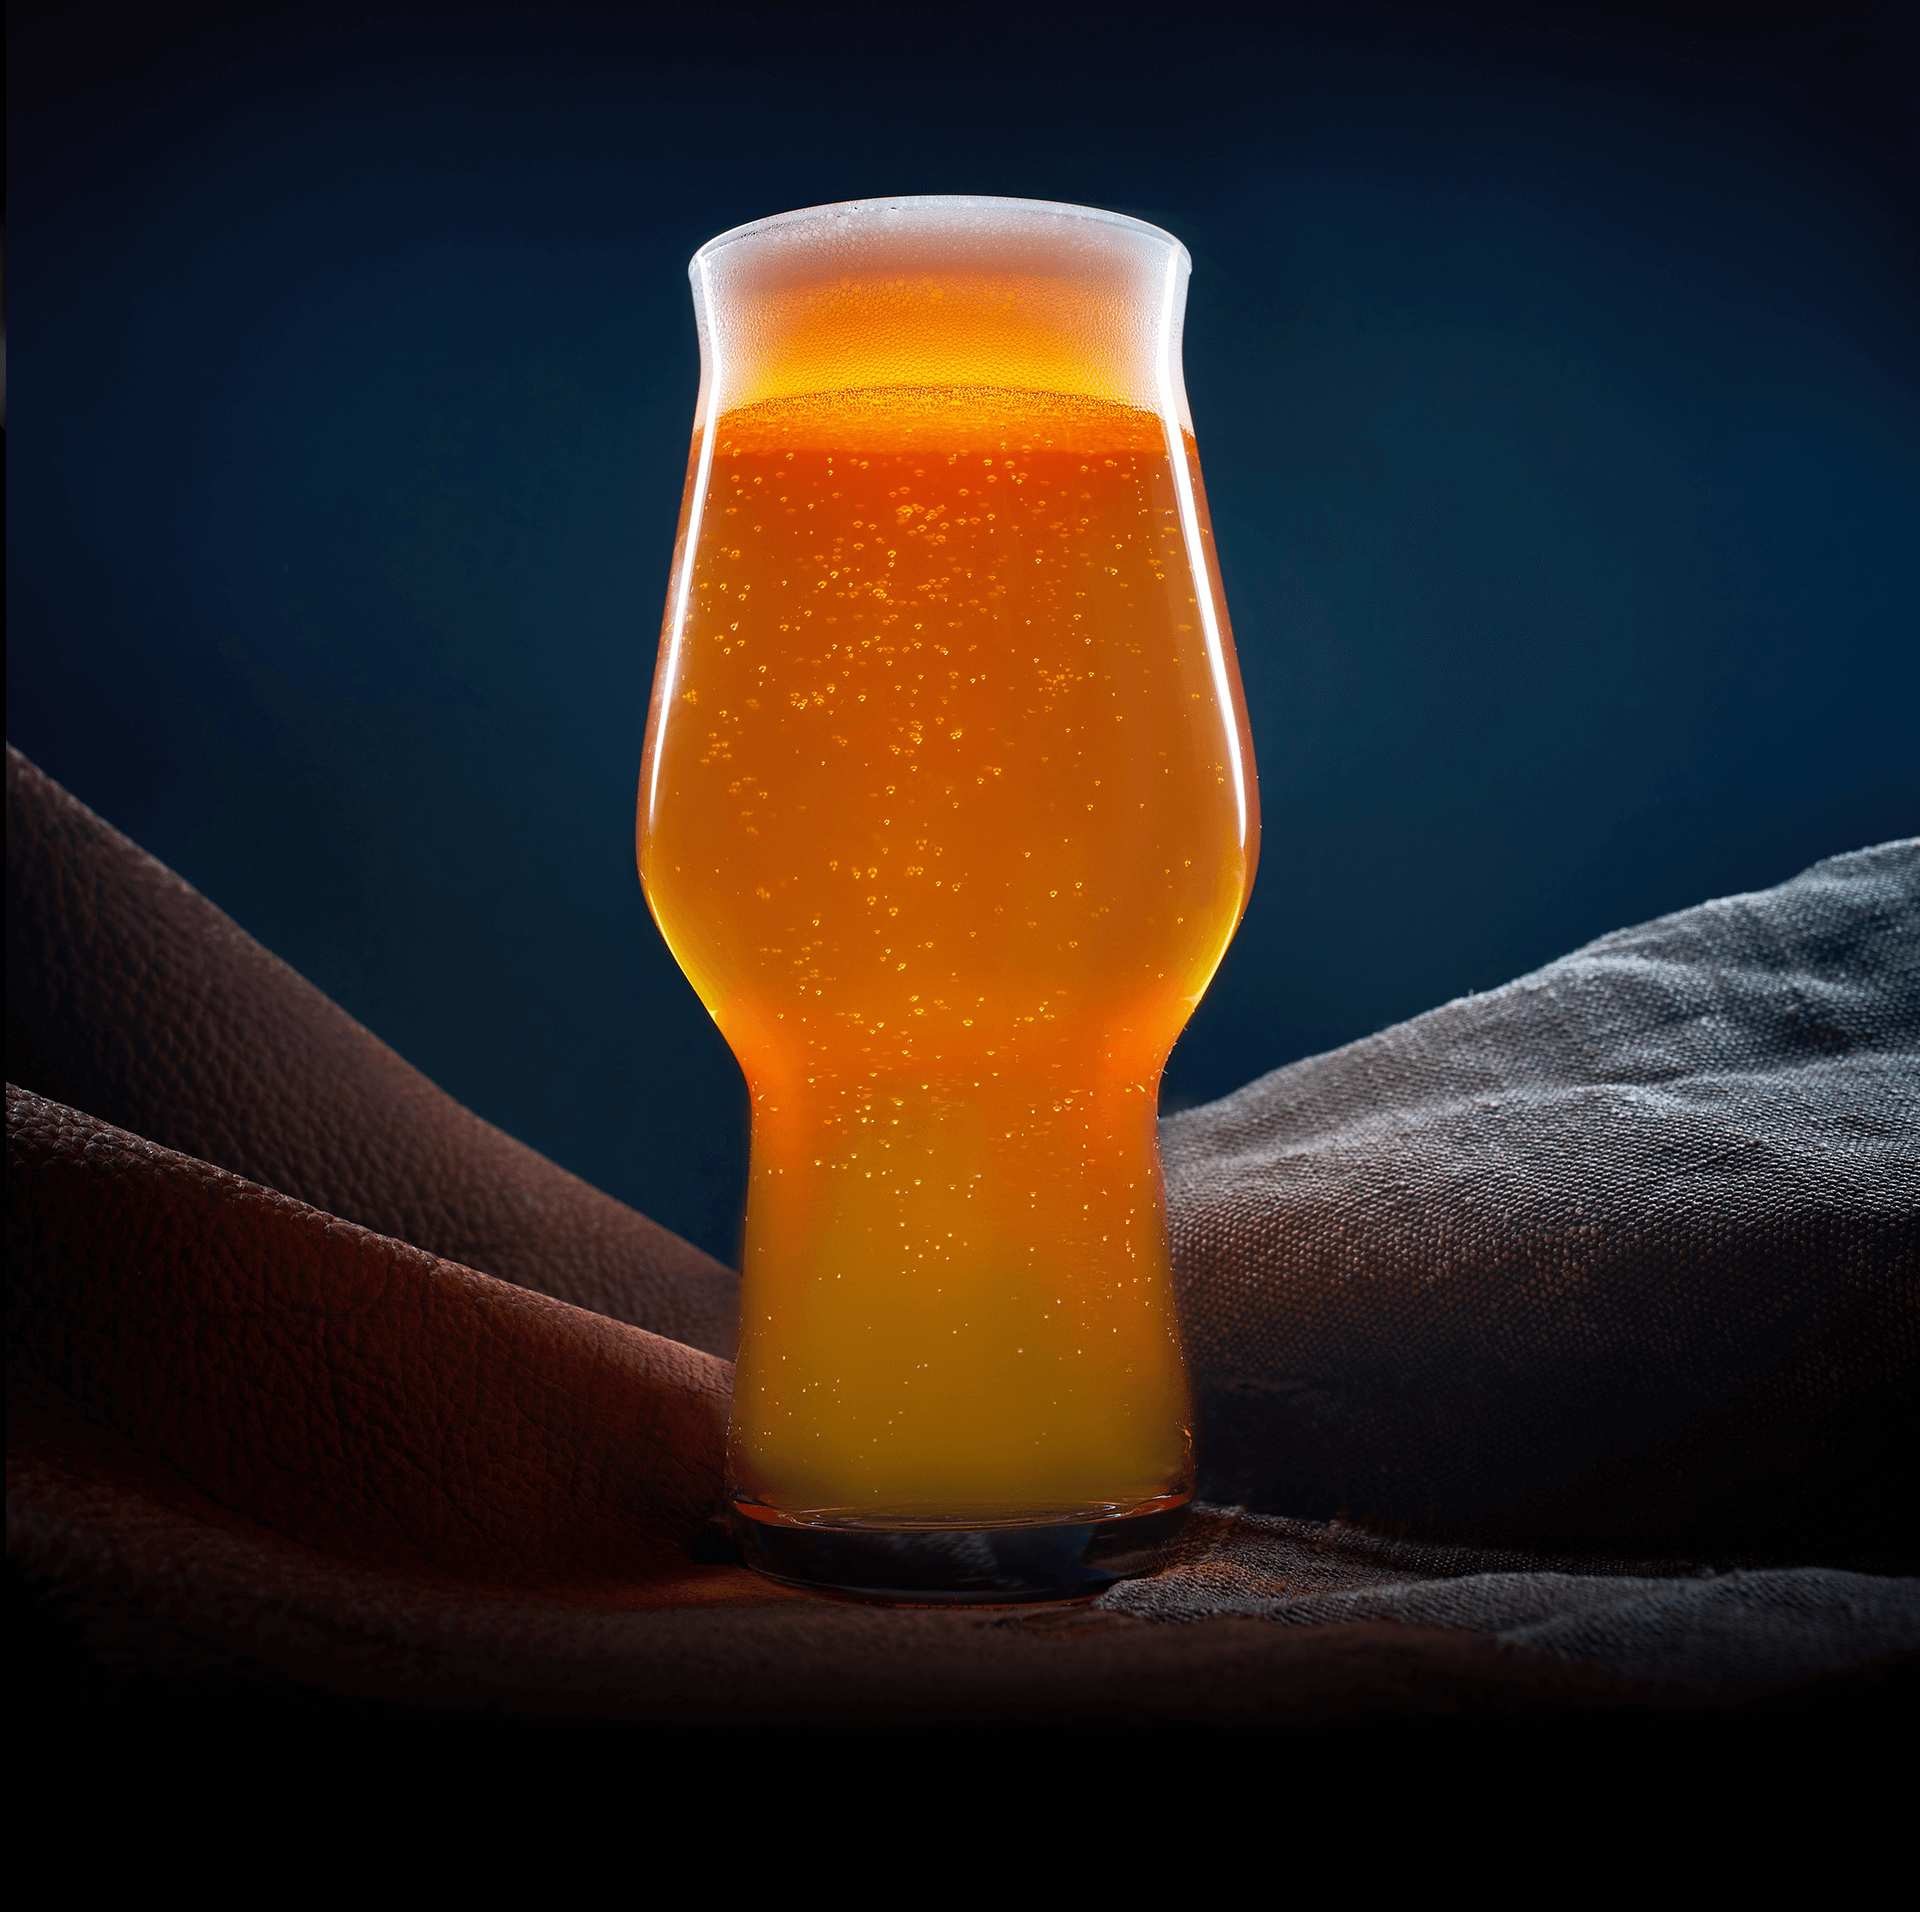 Beer in IPA glass on navy background